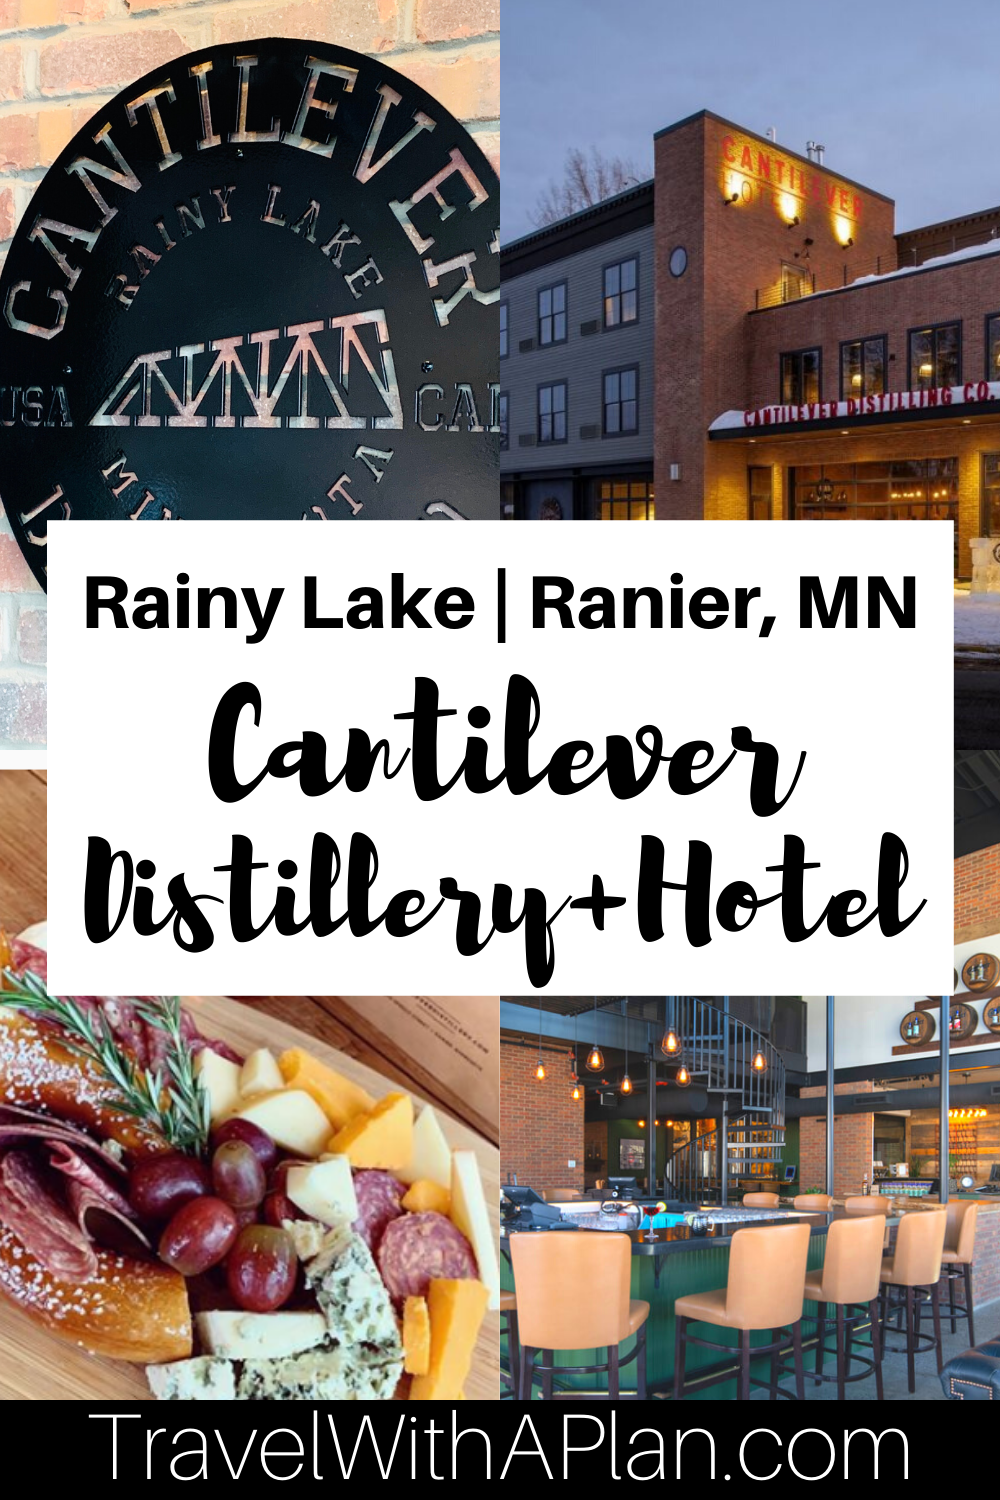 Top U.S. family travel blog Travel With A Plan details their stay at the newest Rainy Lake lodging option that is steps away from Rainy Lake and minutes away from Voyageurs National Park!  Find out all you need to know about Cantilever Distillery +Hotel. #voyageursnationalpark #voyageursnationalparklodging #rainylakelodging #rainylakehotels #cantileverdistillery #cantileverhotel #ranierMN #placestostayonRainyLake